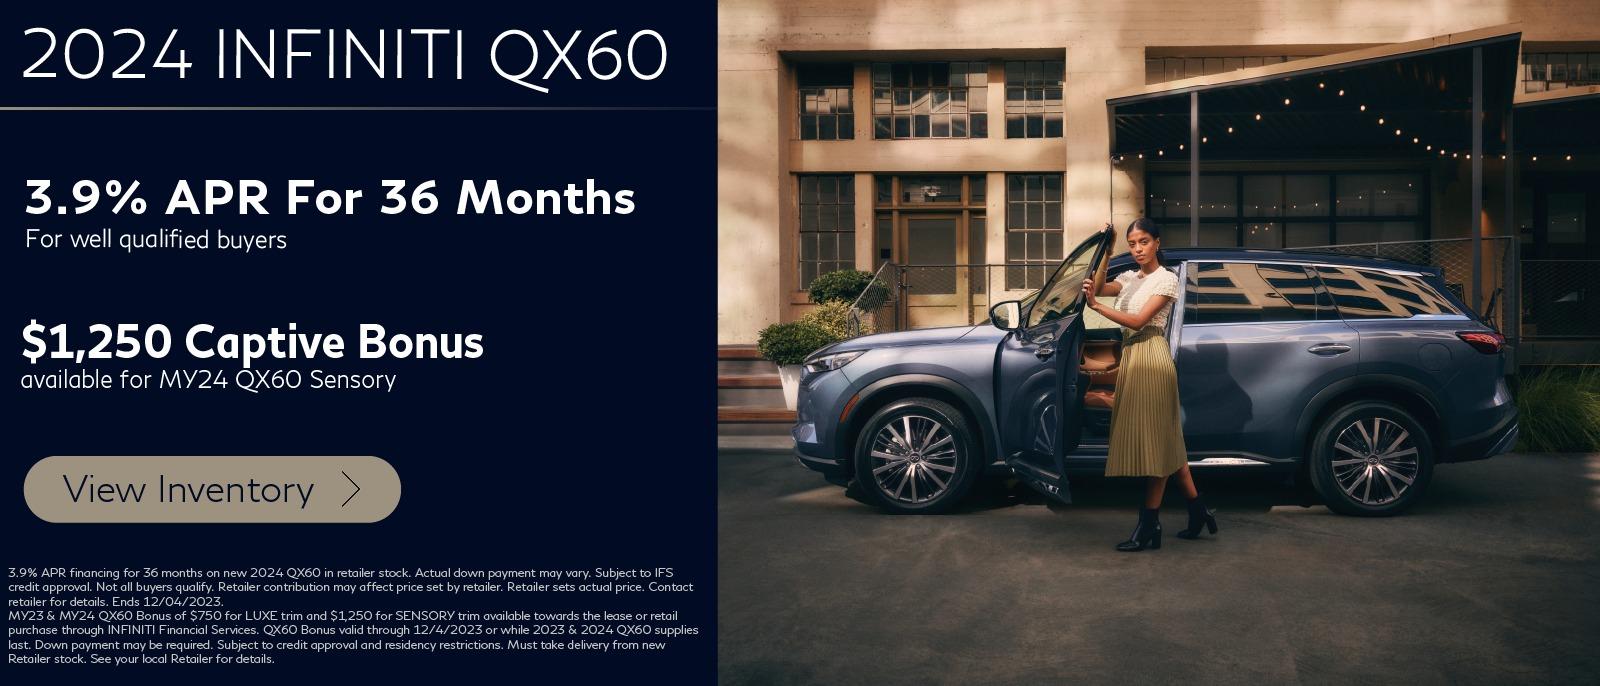 2024 INFINITI QX60 3.9% APR For 36 Months For well qualified buyers $1,250 Captive Bonus available for MY24 QX60 Sensory